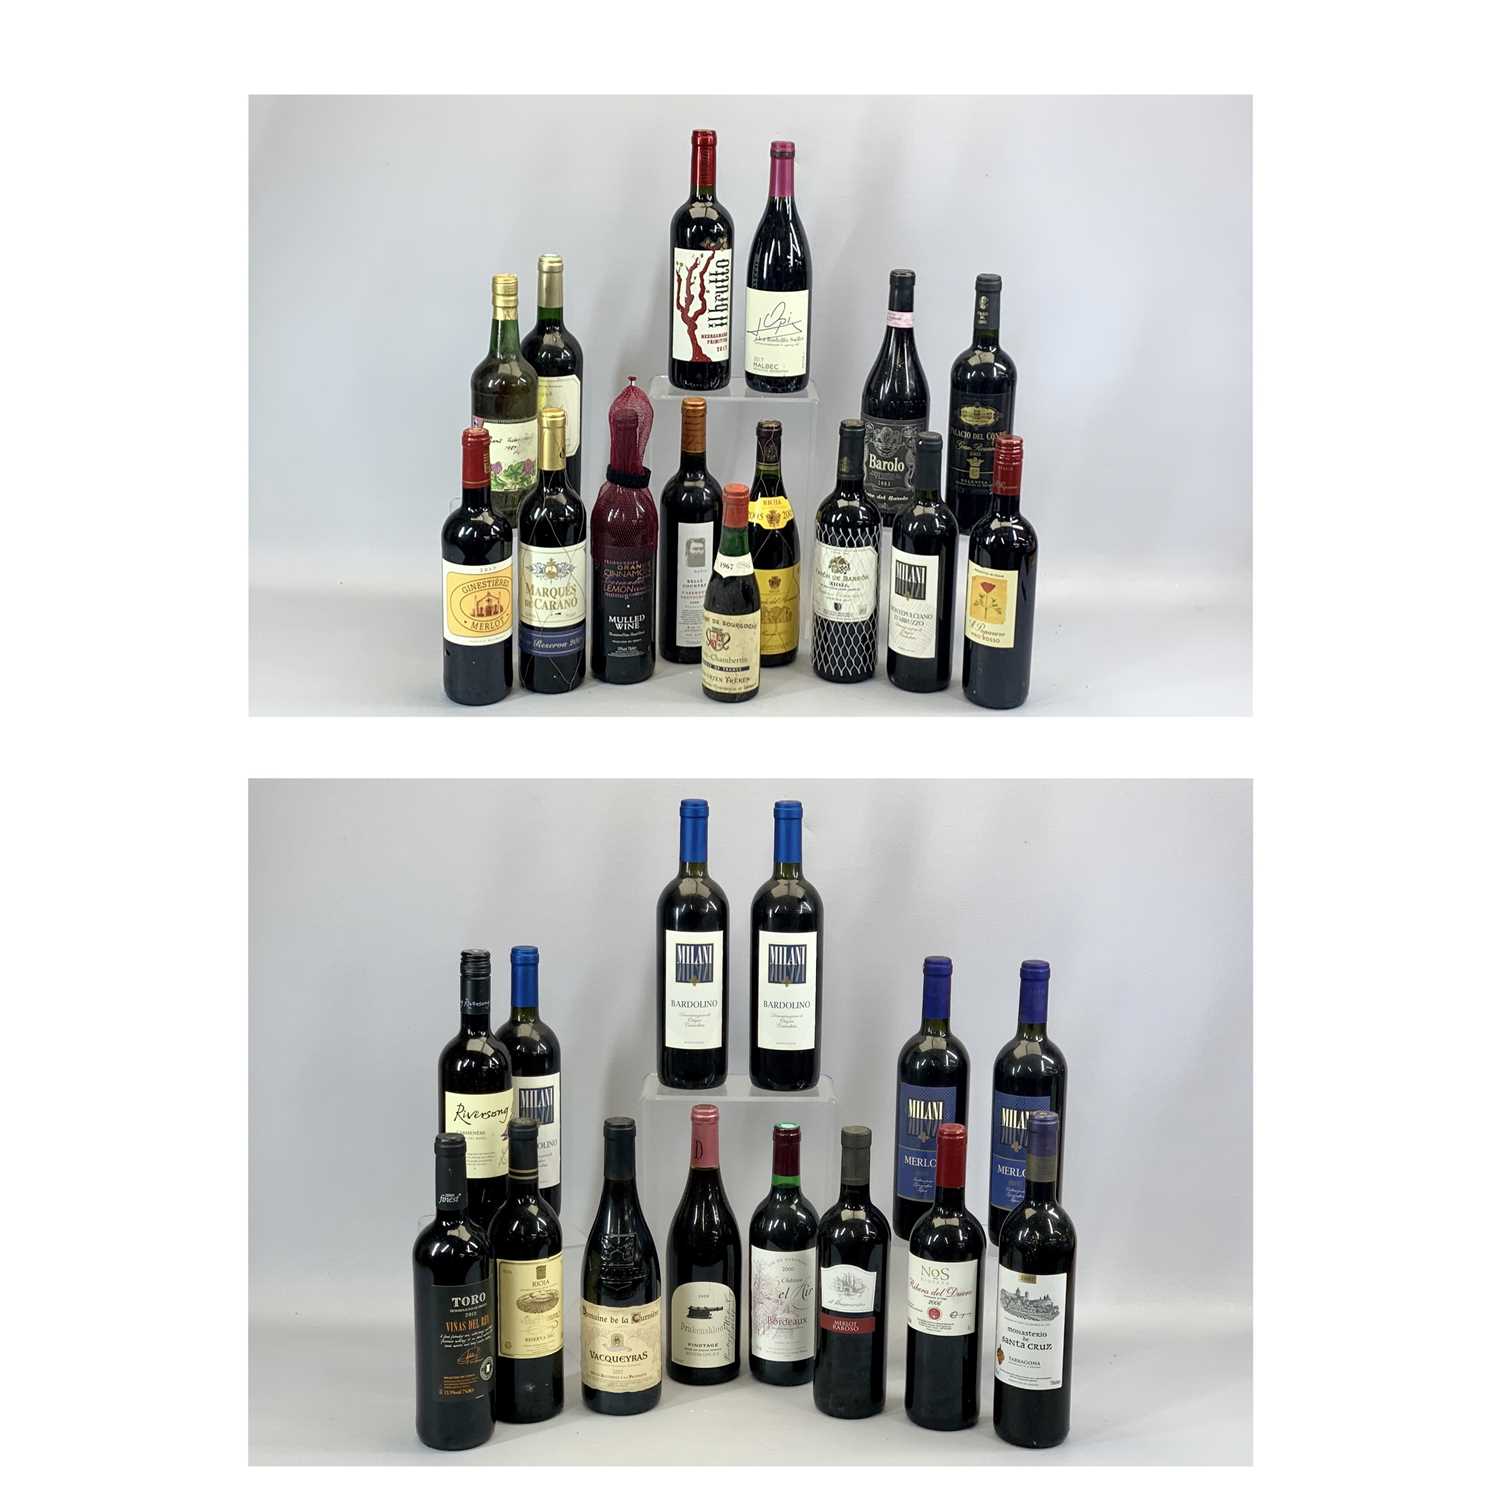 TWENTY-EIGHT BOTTLES & ONE HALF BOTTLE OF RED WINES, French, Italian, Spanish and South African